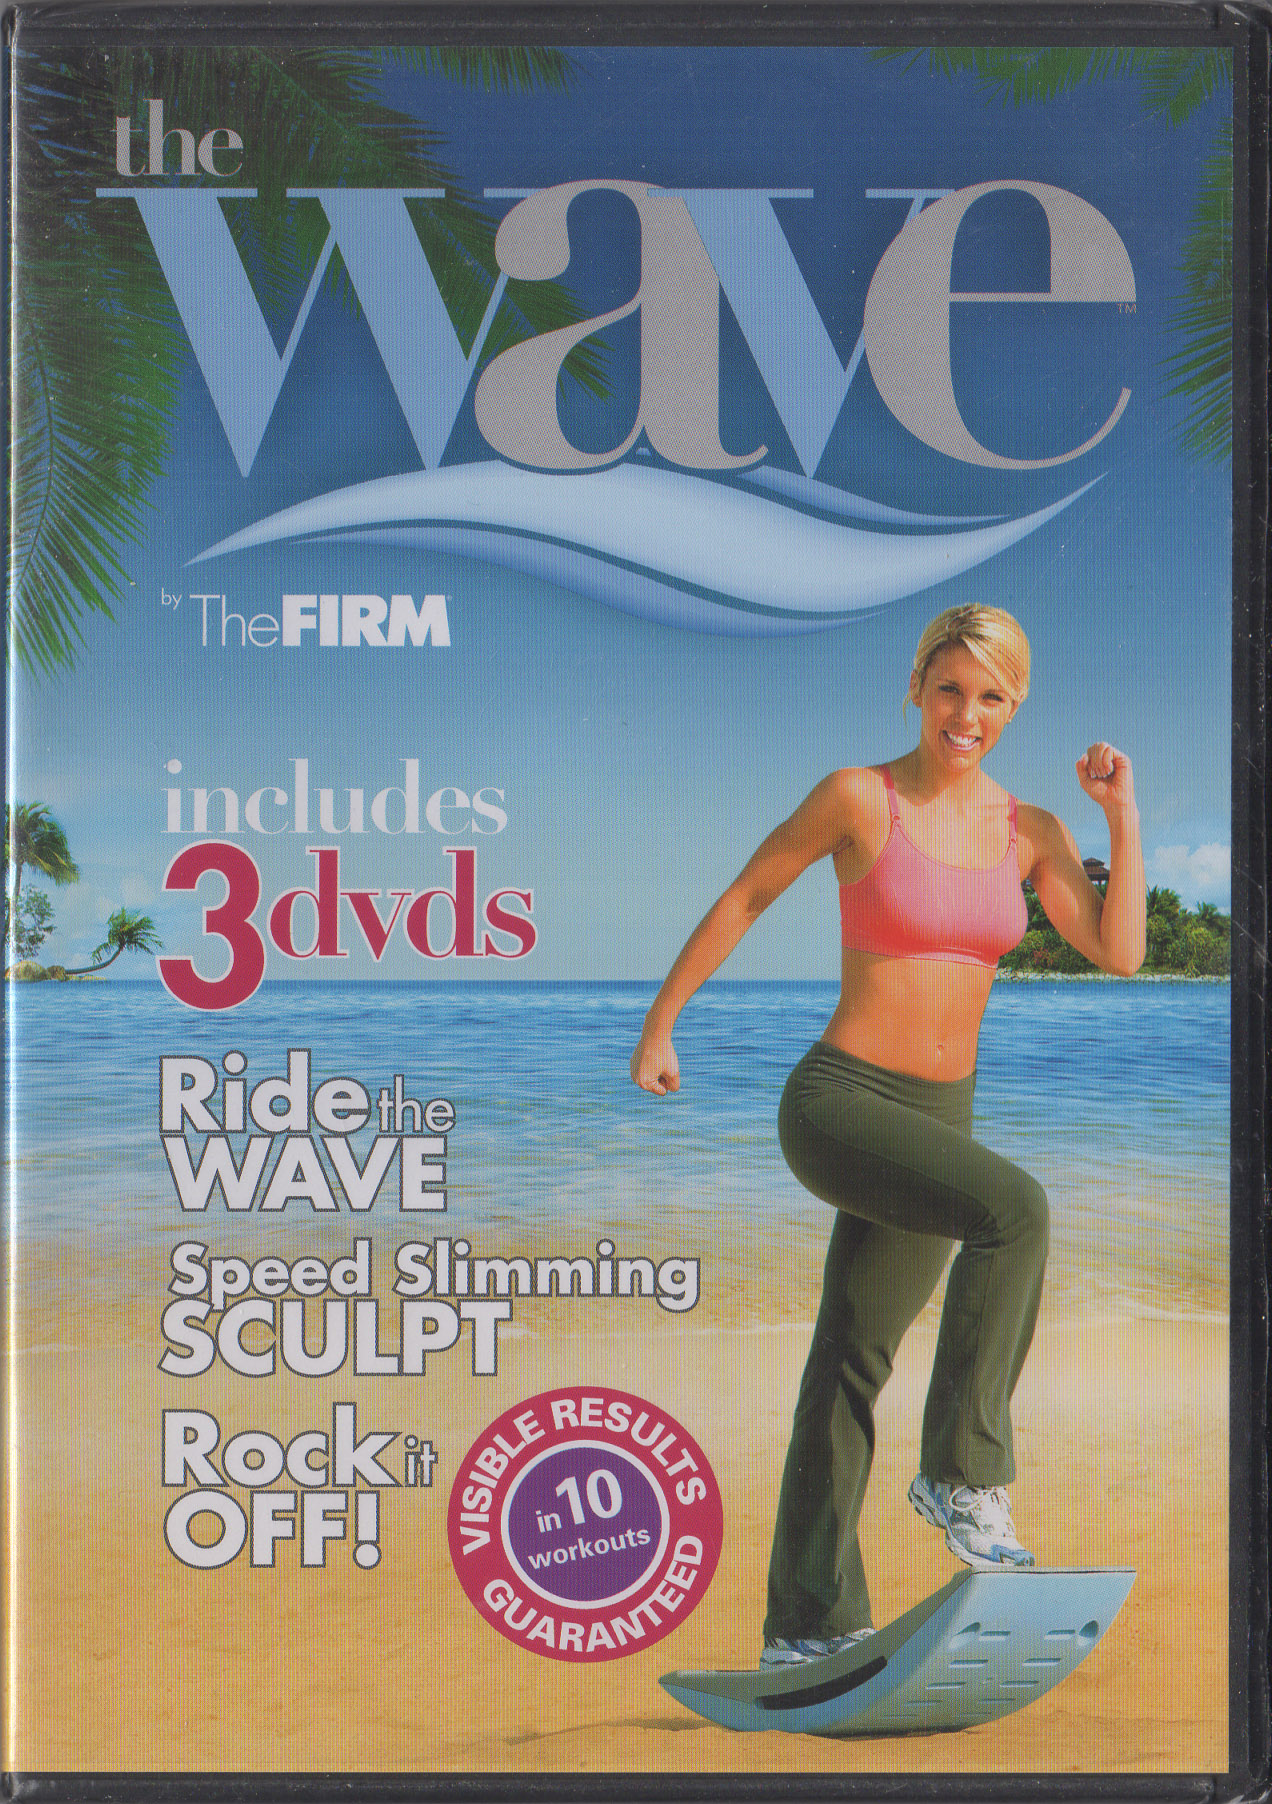 THE WAVE - 3 DVDS